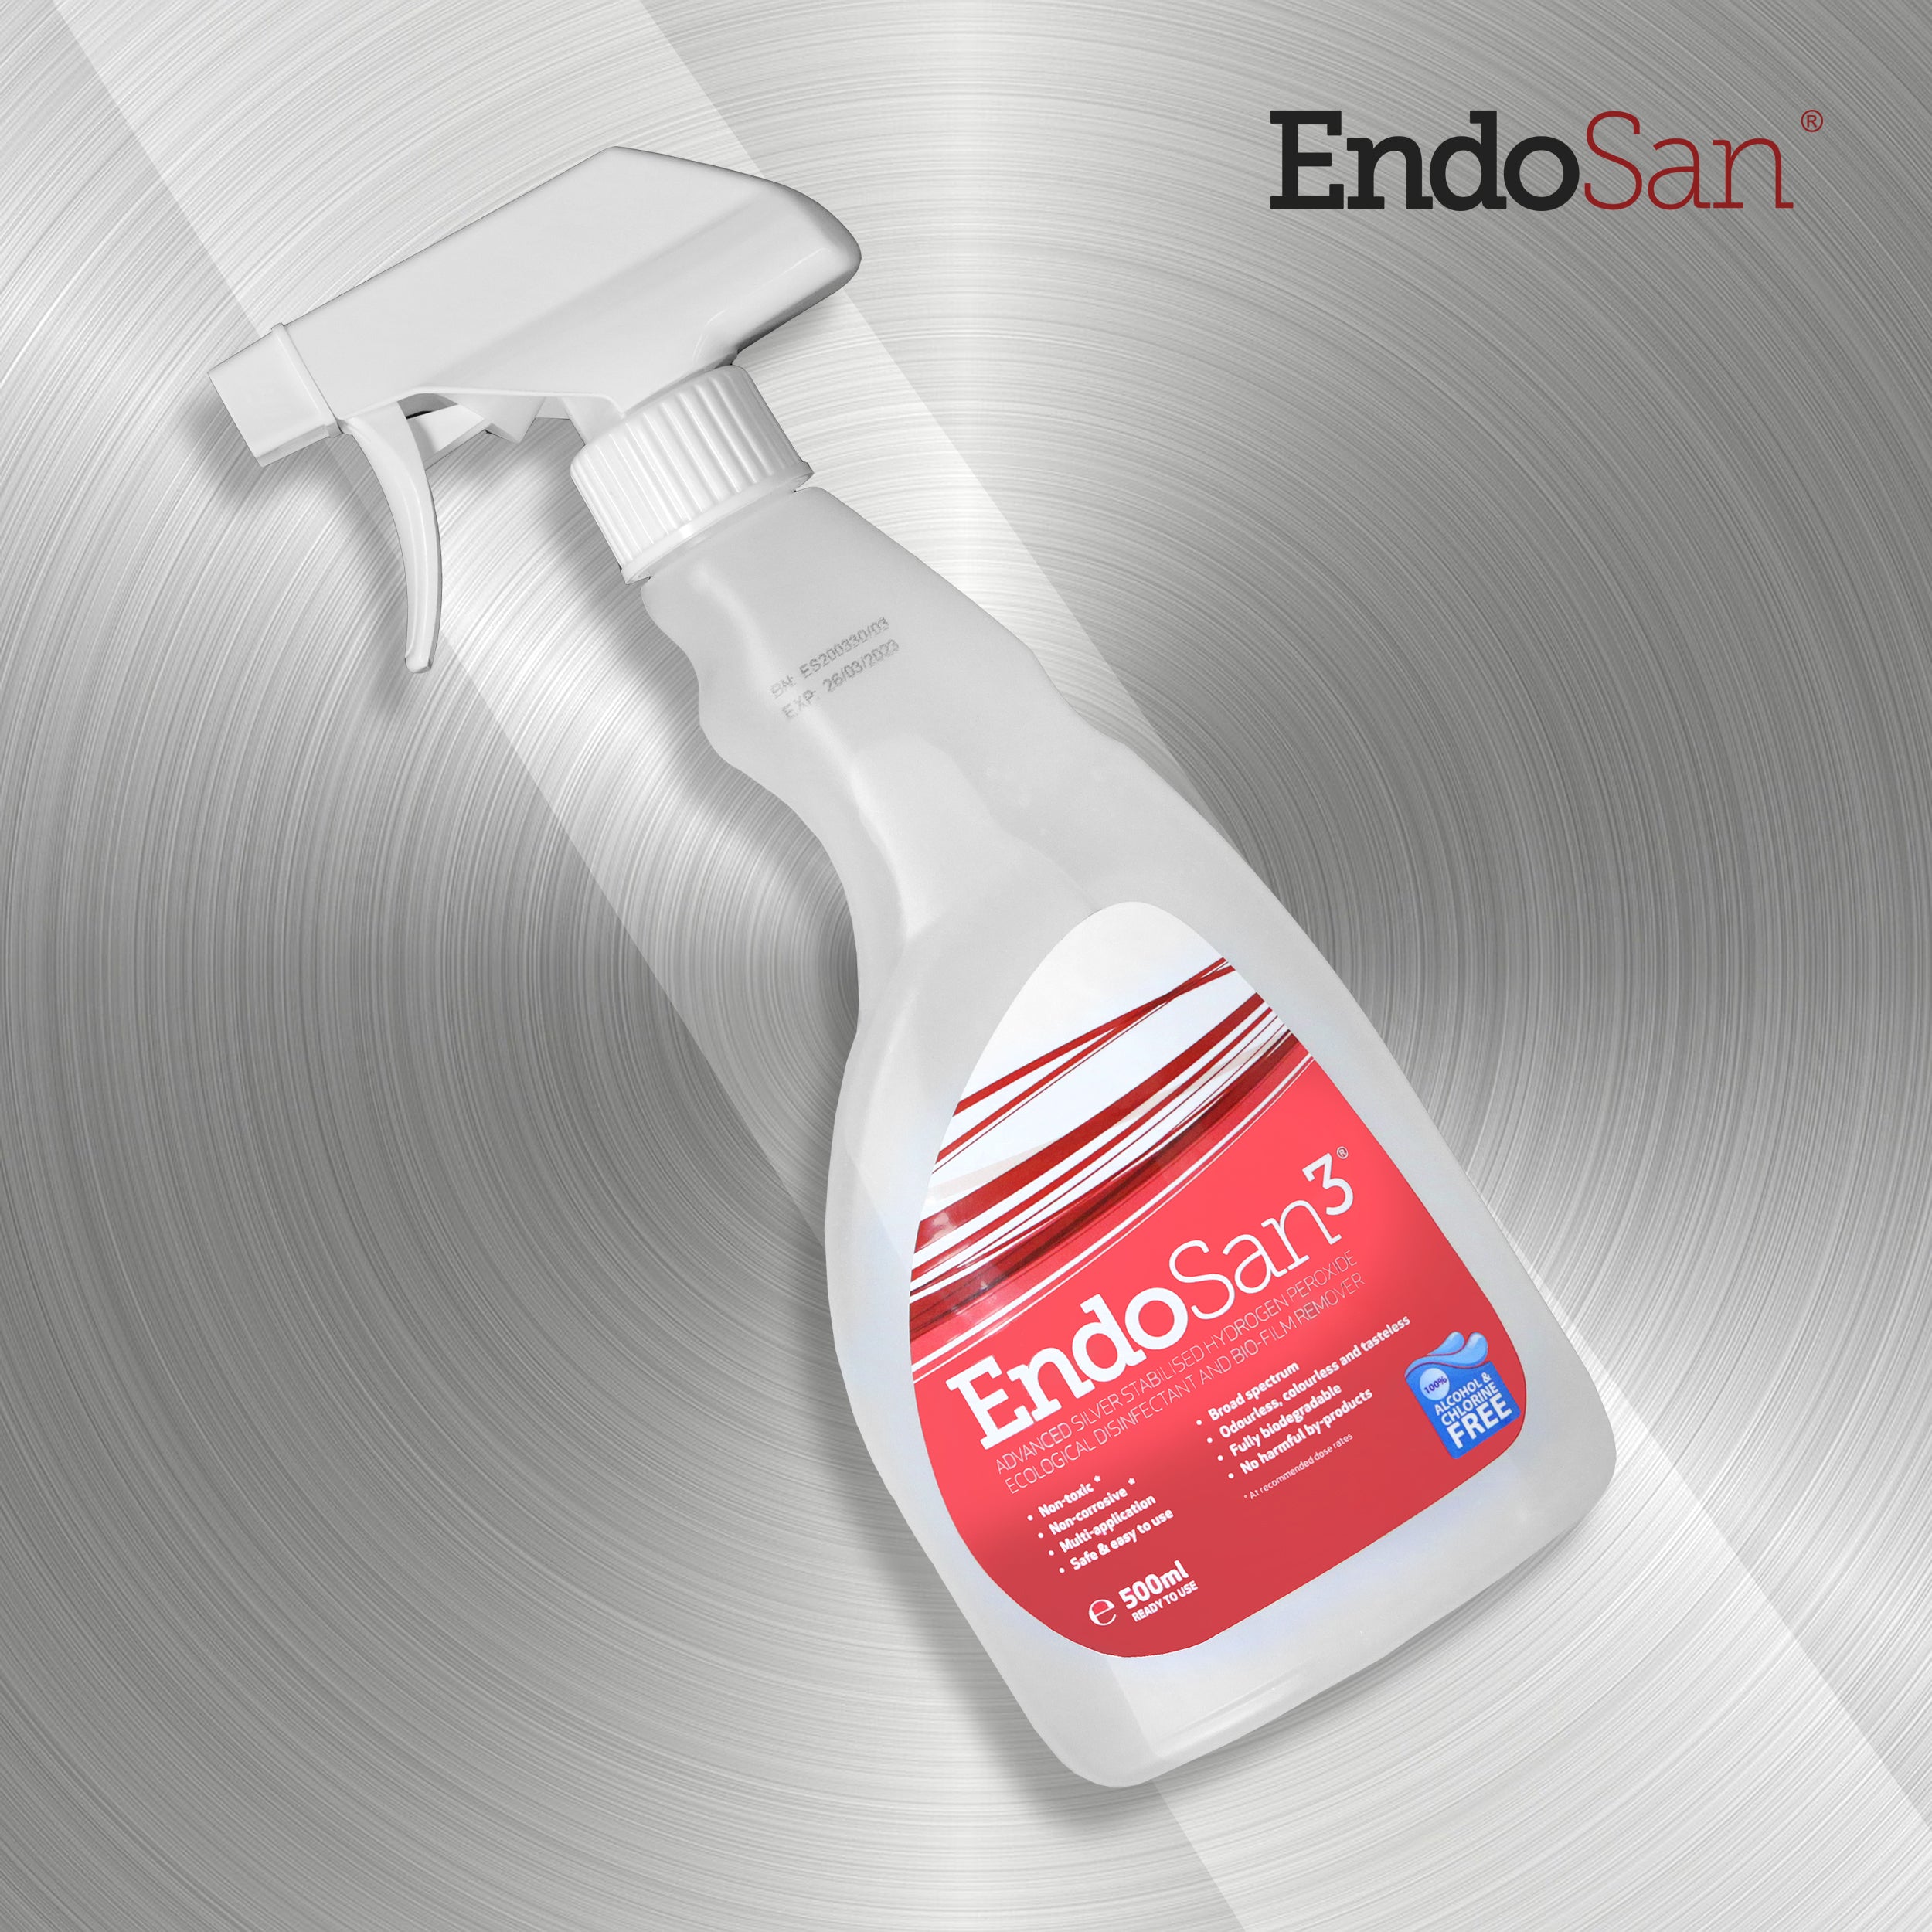 EndoSan Hard Surface Cleaner/Disinfectant